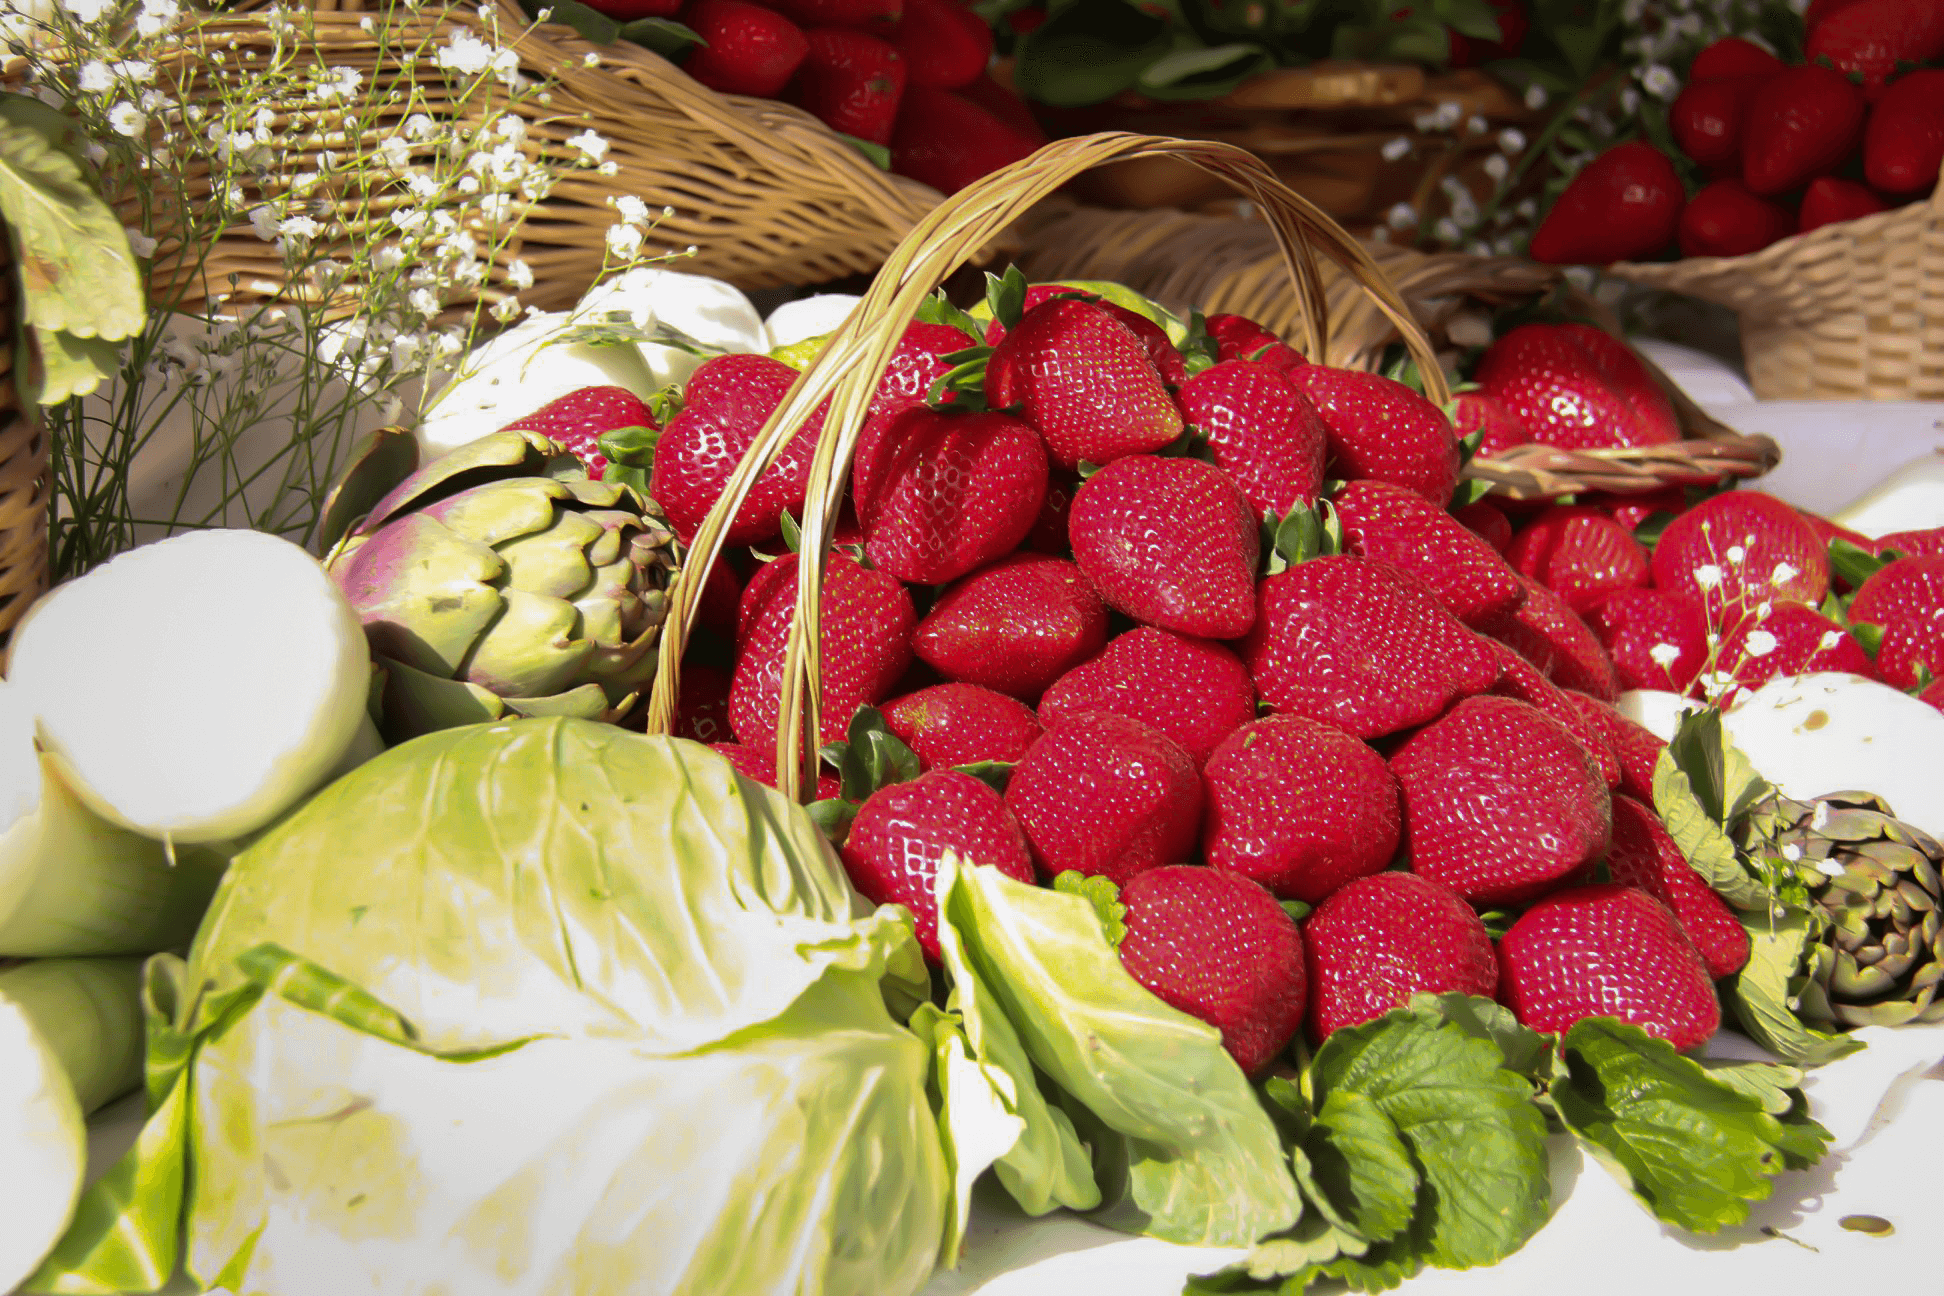 Basket with Straberries